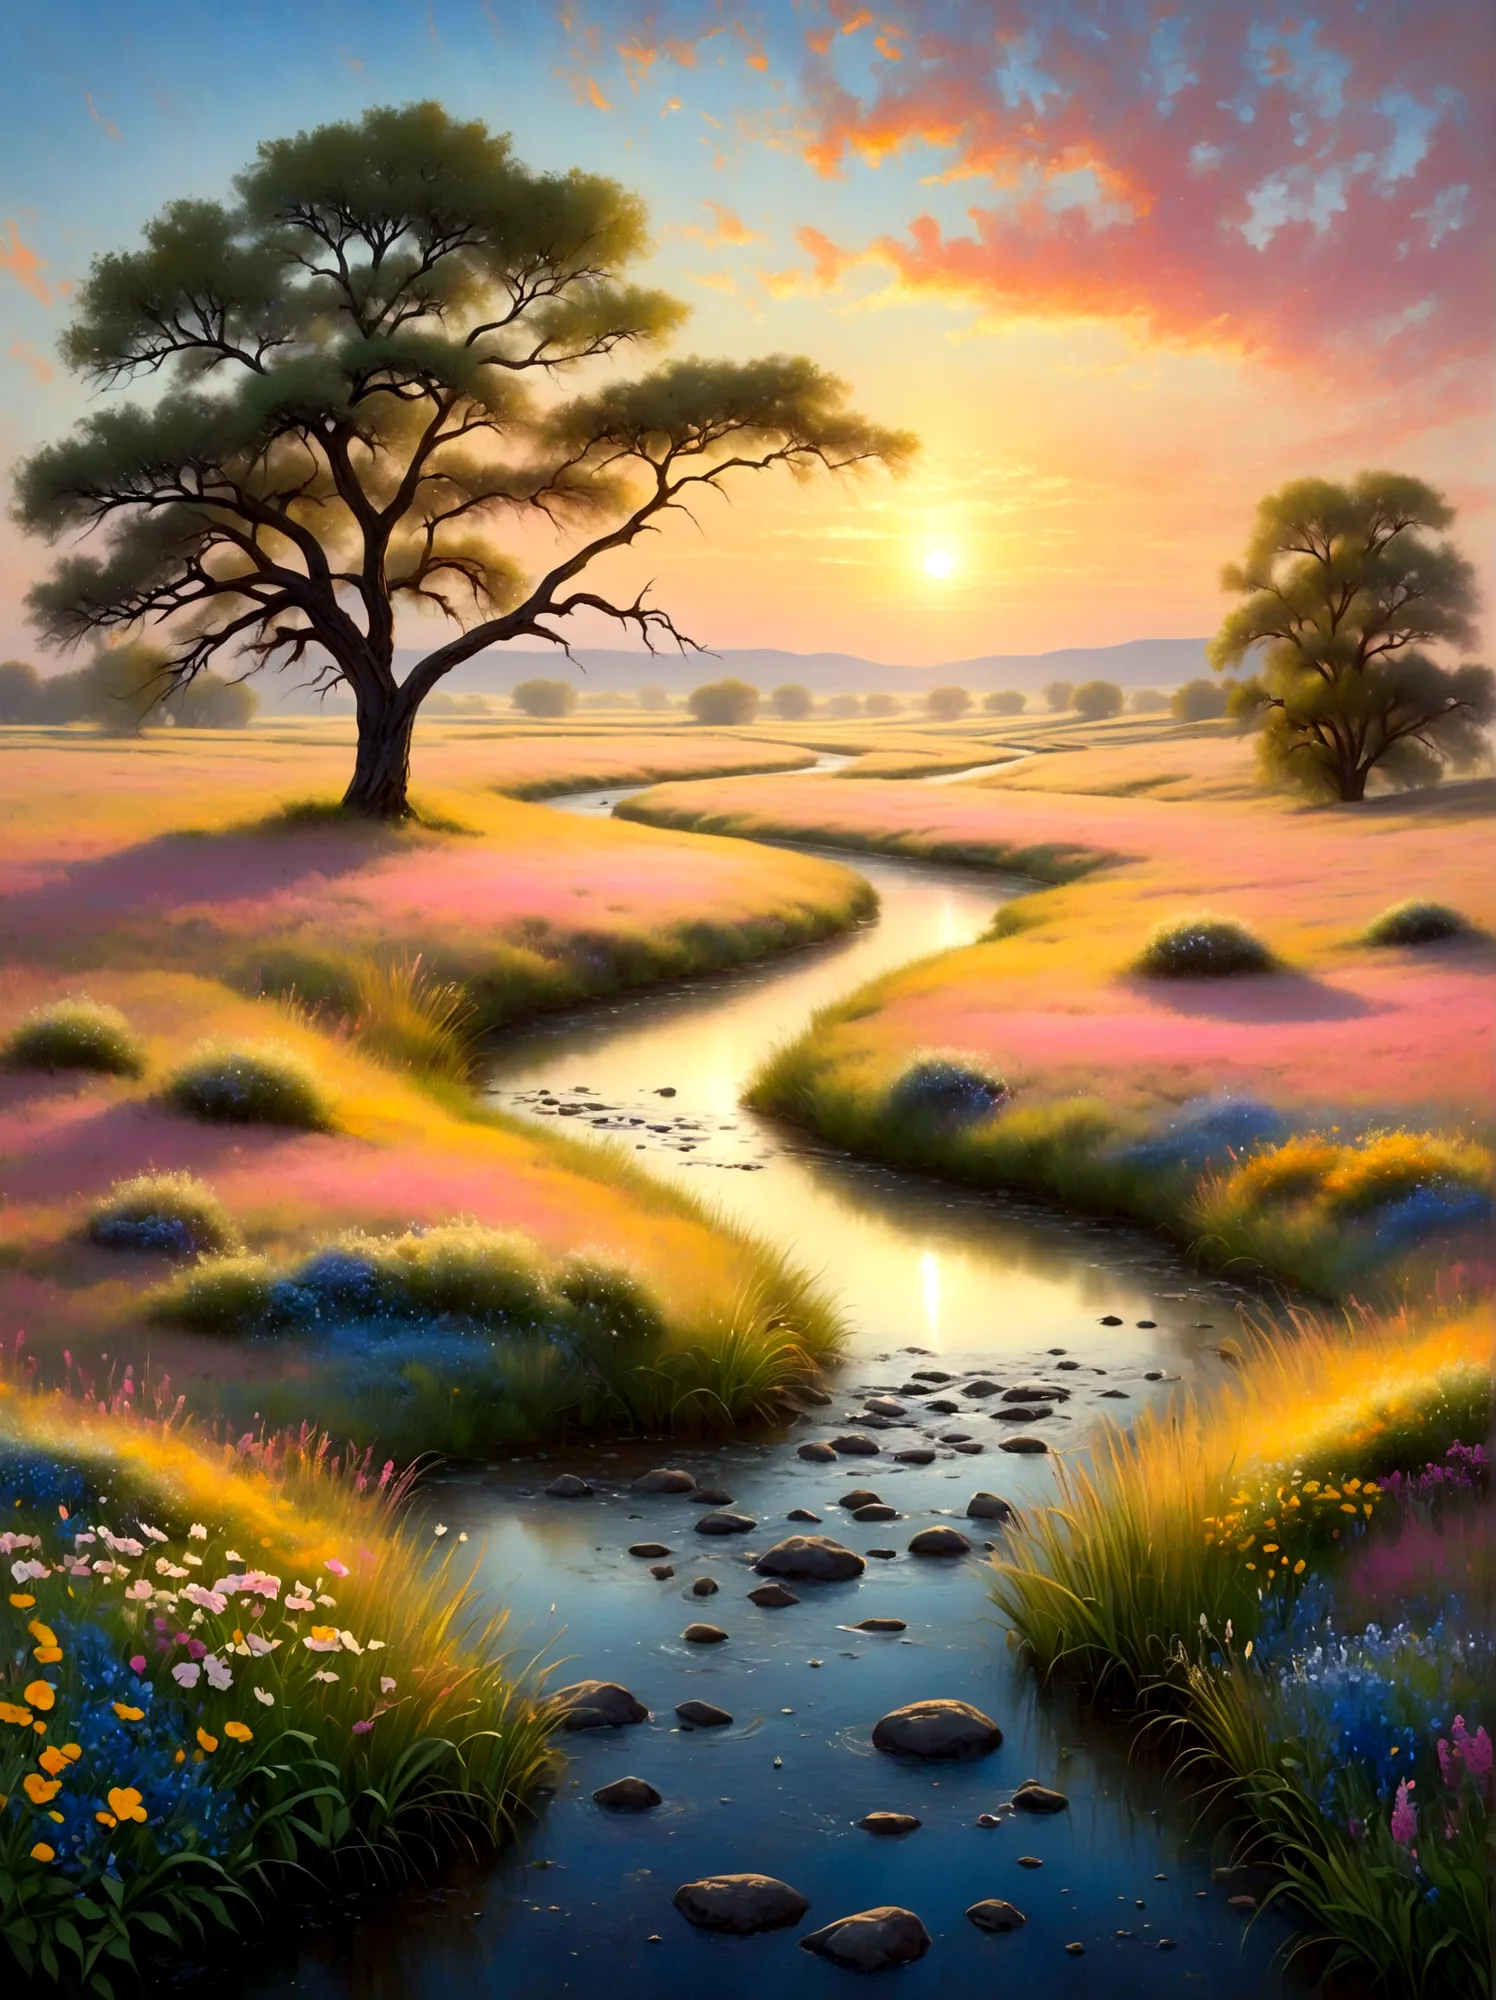 (Sunrise Time:1.6), A serene image of an enchanting landscape at dawn. The sky is painted with the first light of day - soft pin...